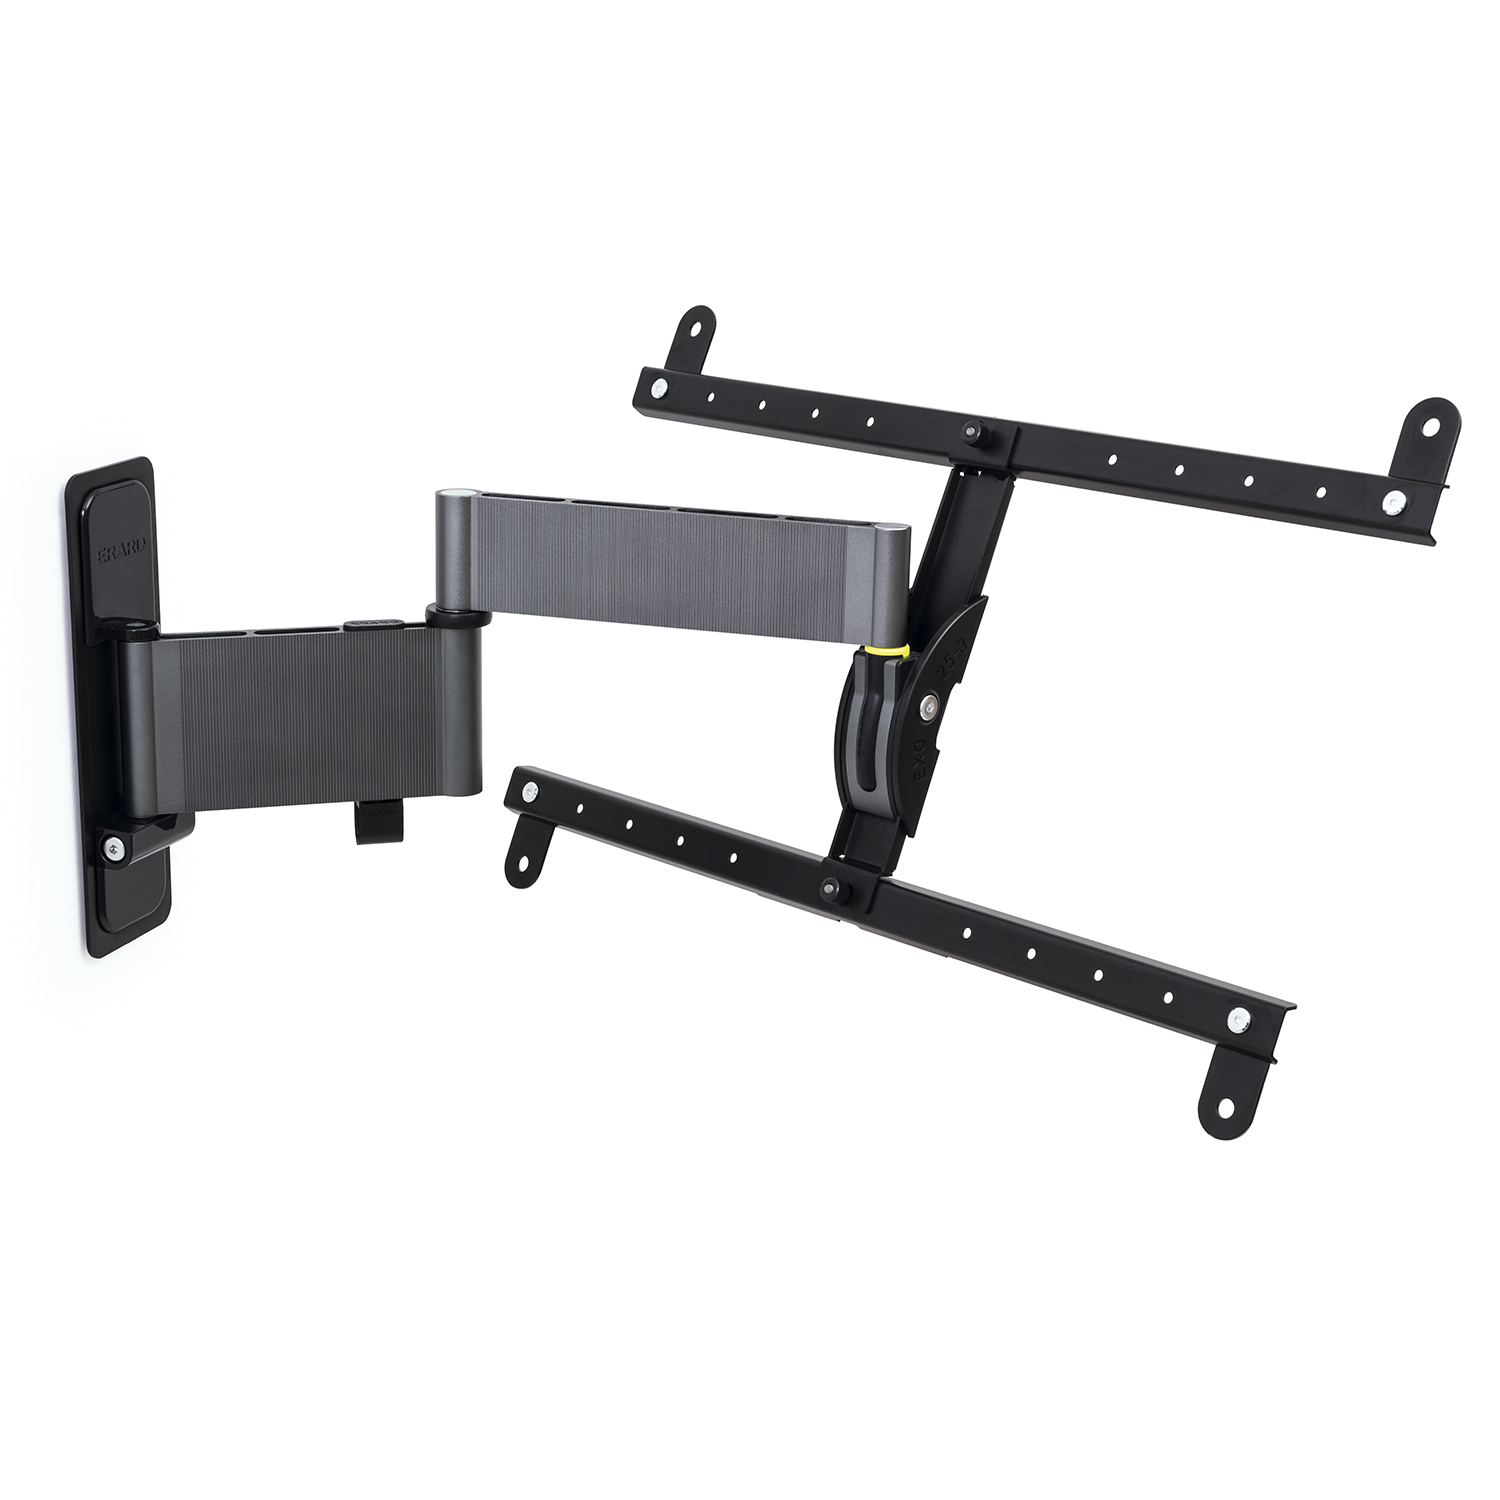 EXO 600TW3 - support mural inclinable orientable